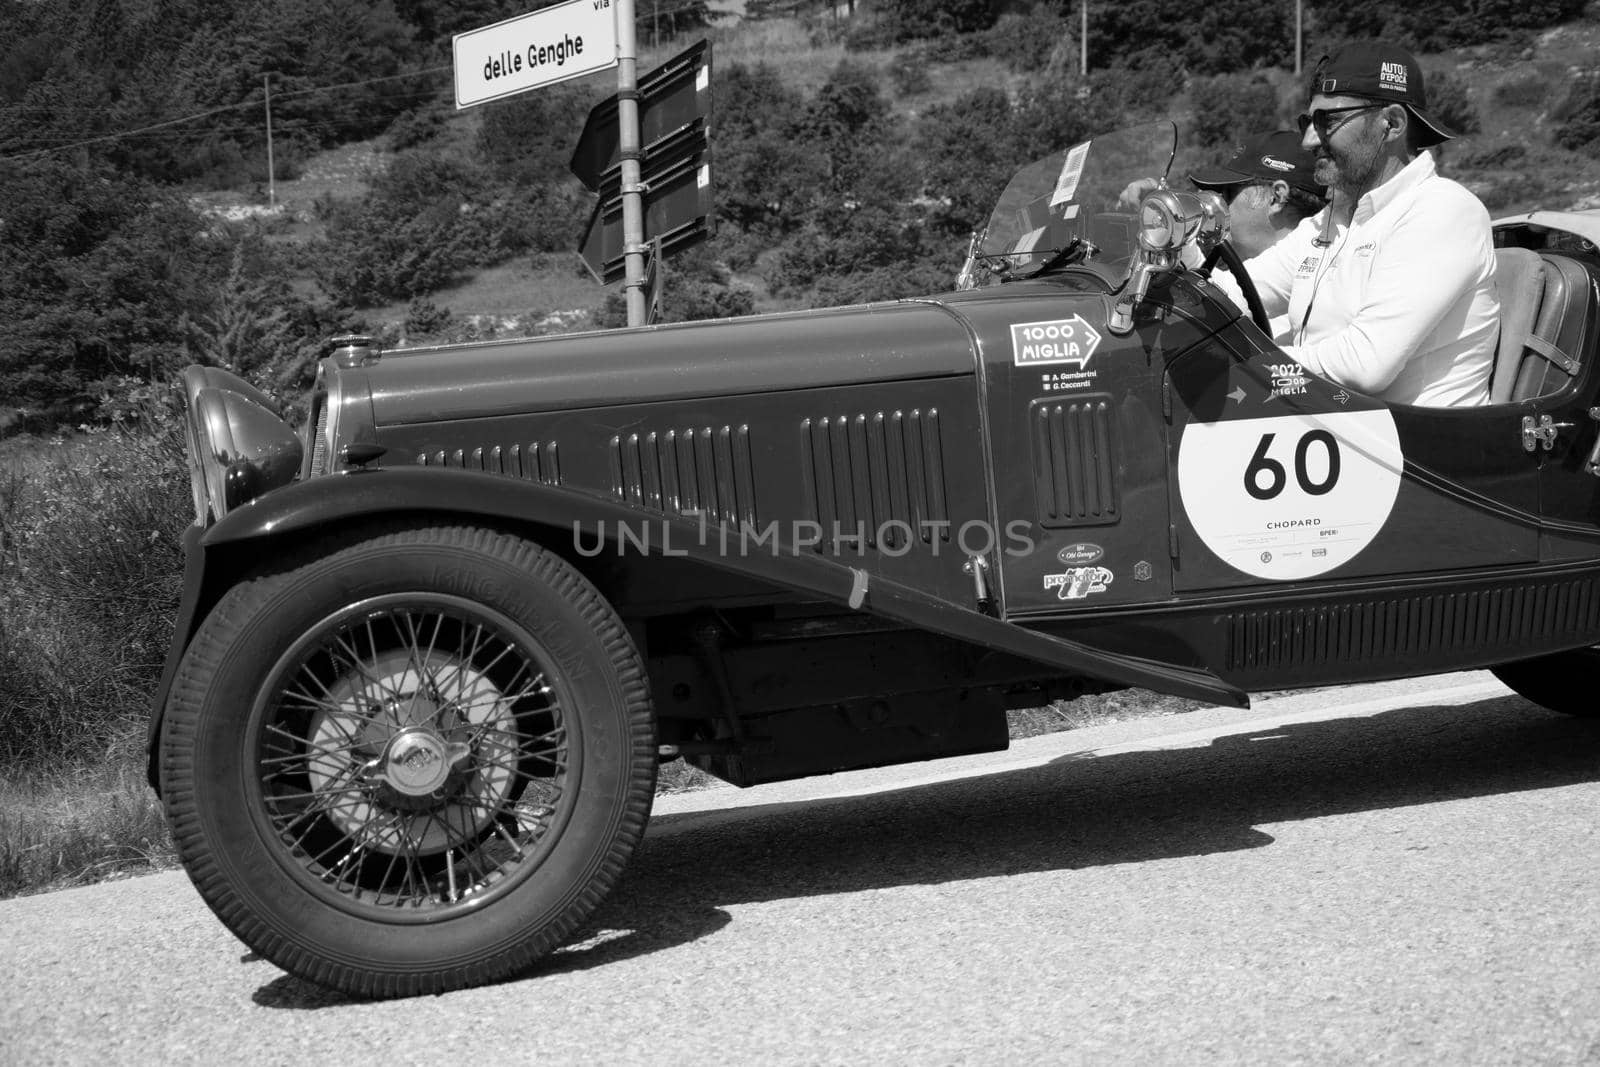 URBINO - ITALY - JUN 16 - 2022 : FIAT 514 MM 1930 on an old racing car in rally Mille Miglia 2022 the famous italian historical race (1927-1957